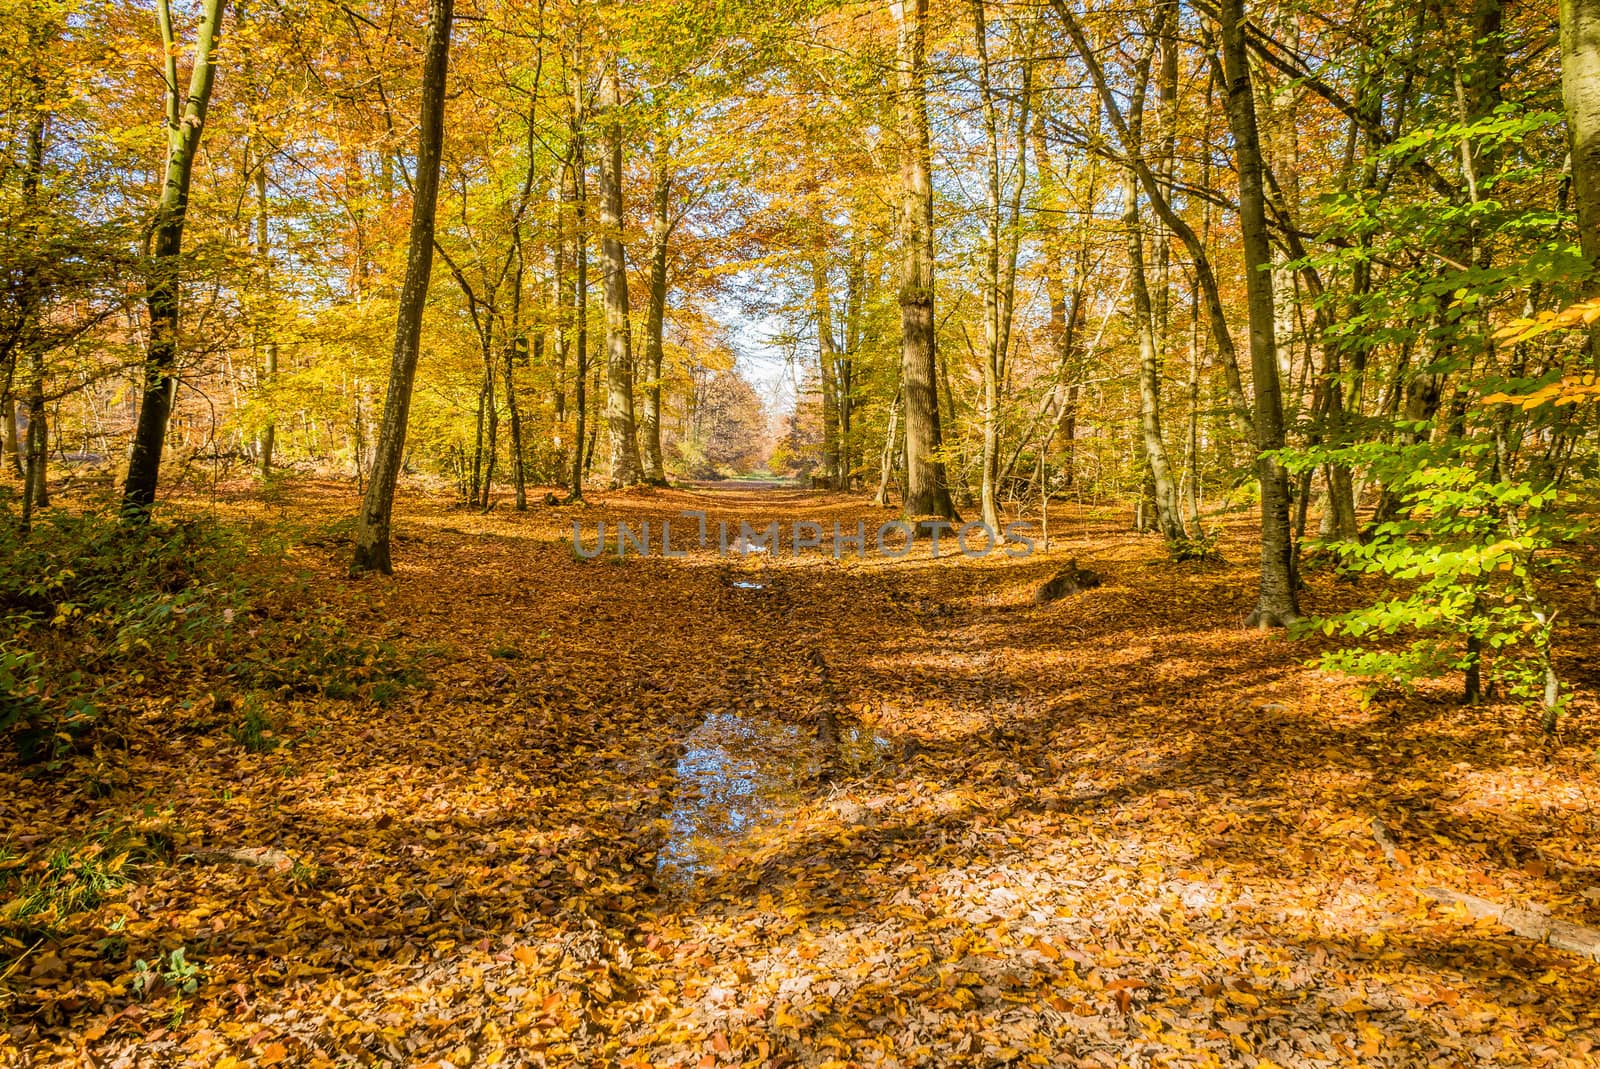 After the rain in Fontainebleau forest in autumn